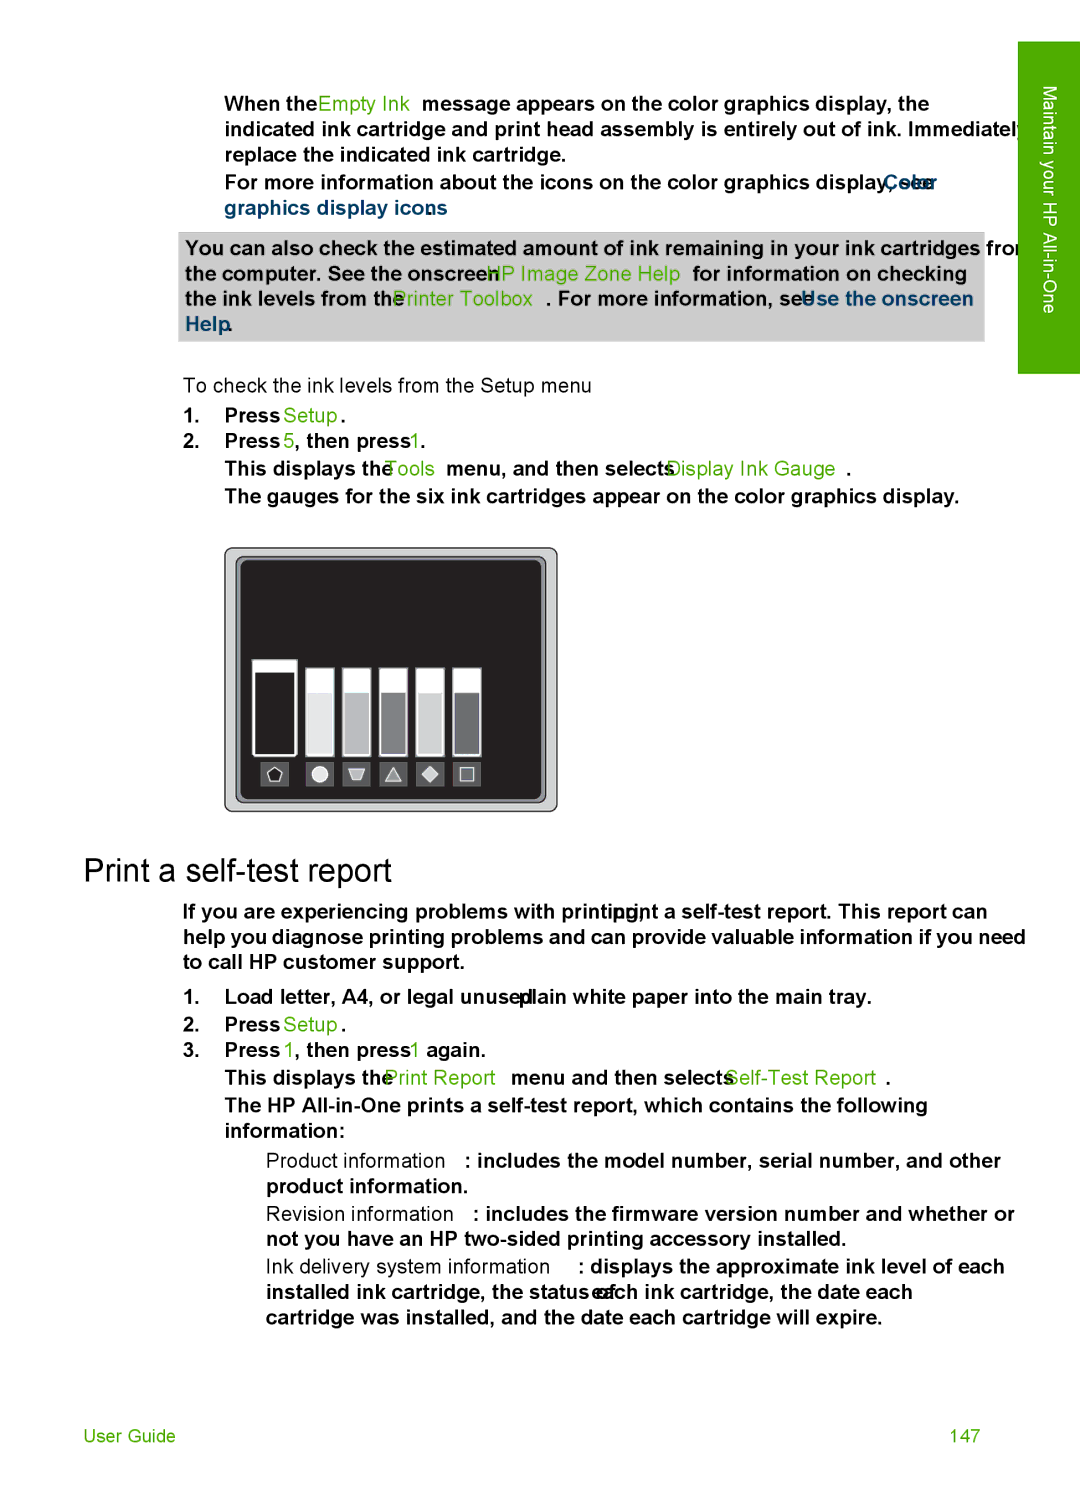 HP 3300 manual Print a self-test report, To check the ink levels from the Setup menu 